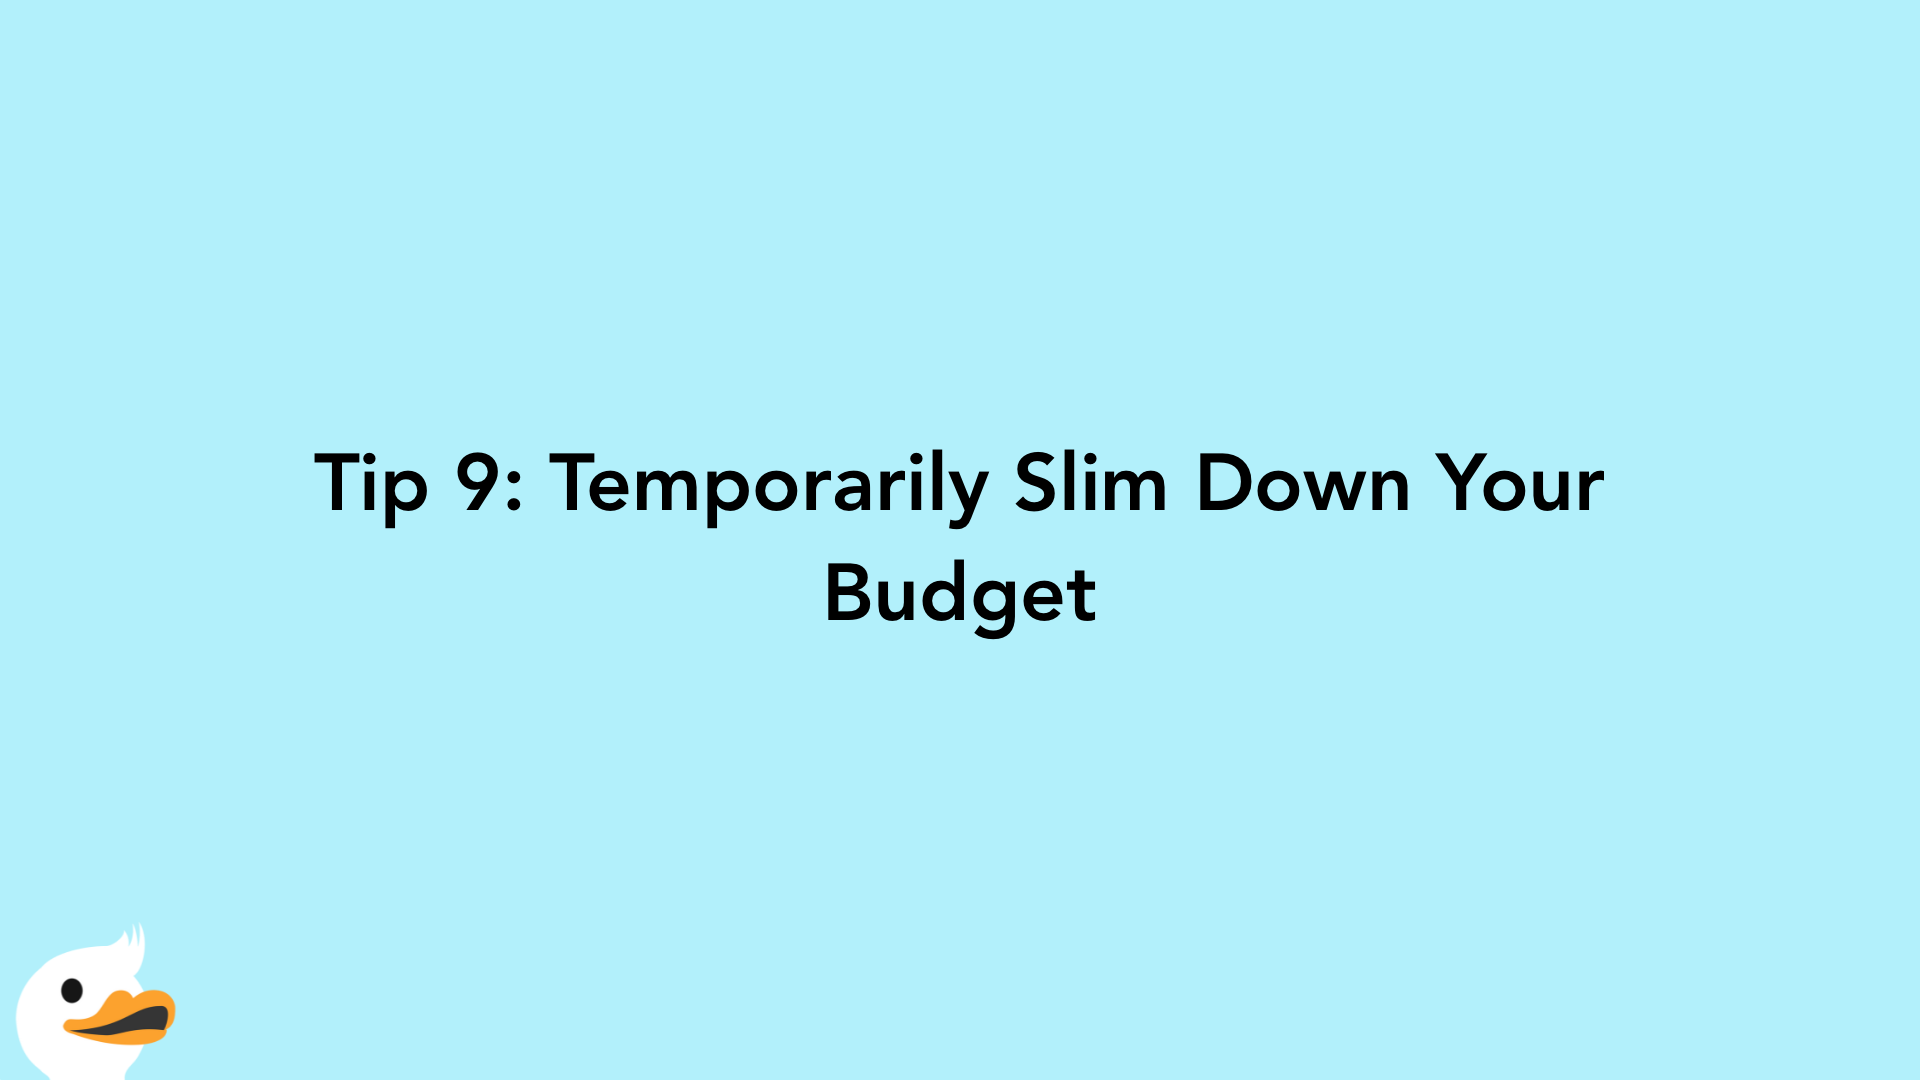 Tip 9: Temporarily Slim Down Your Budget